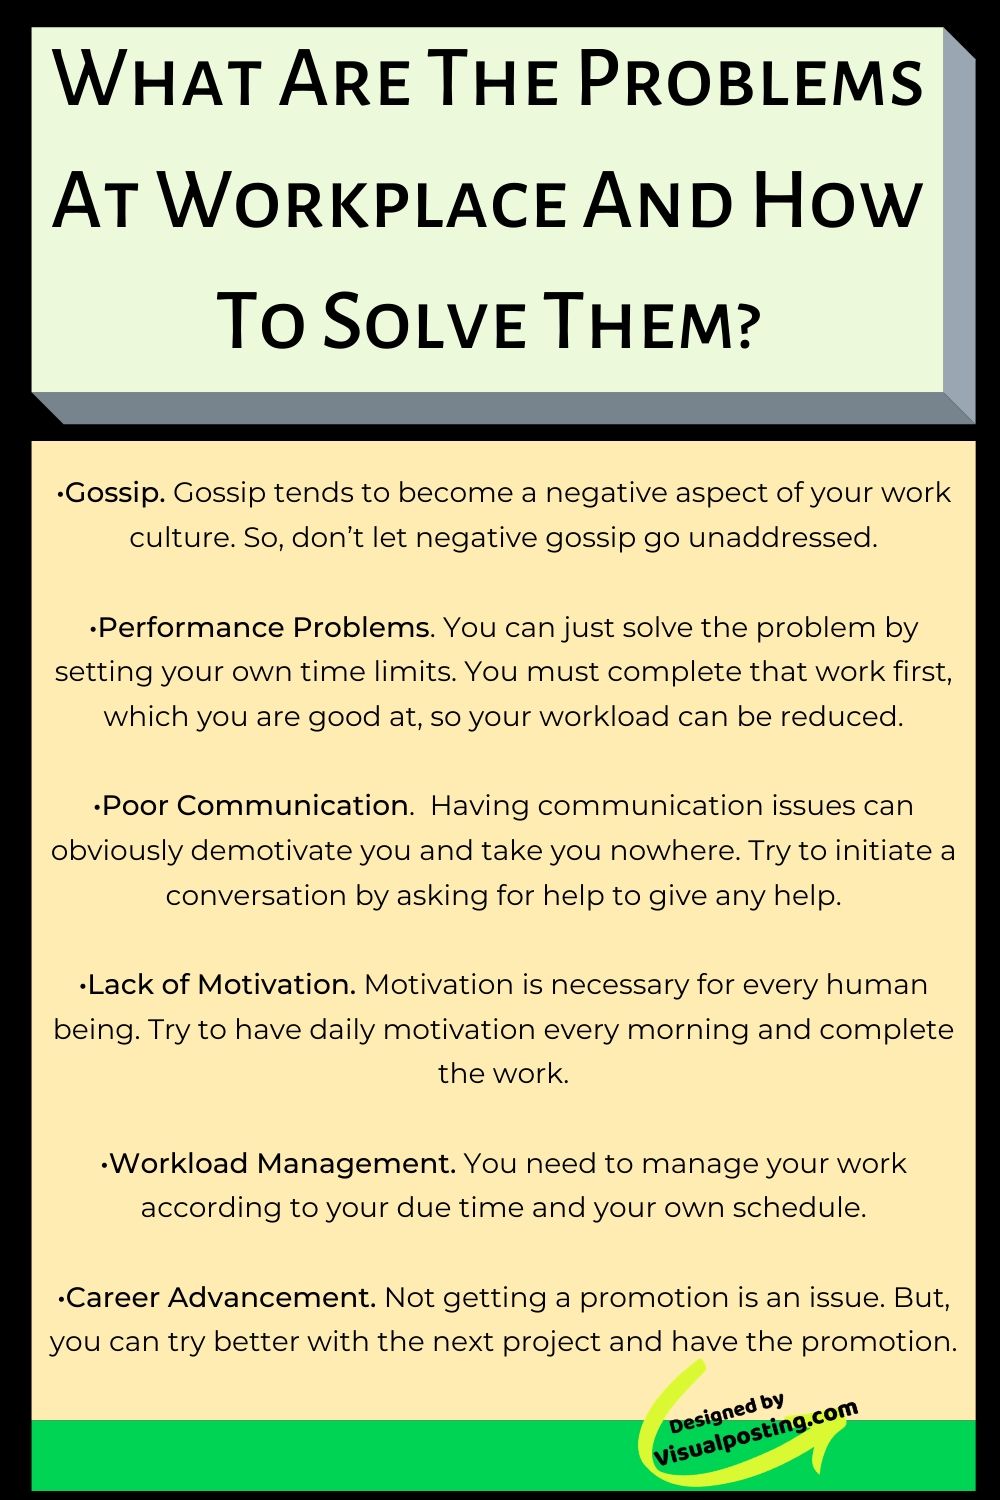 how do you solve problems at work examples